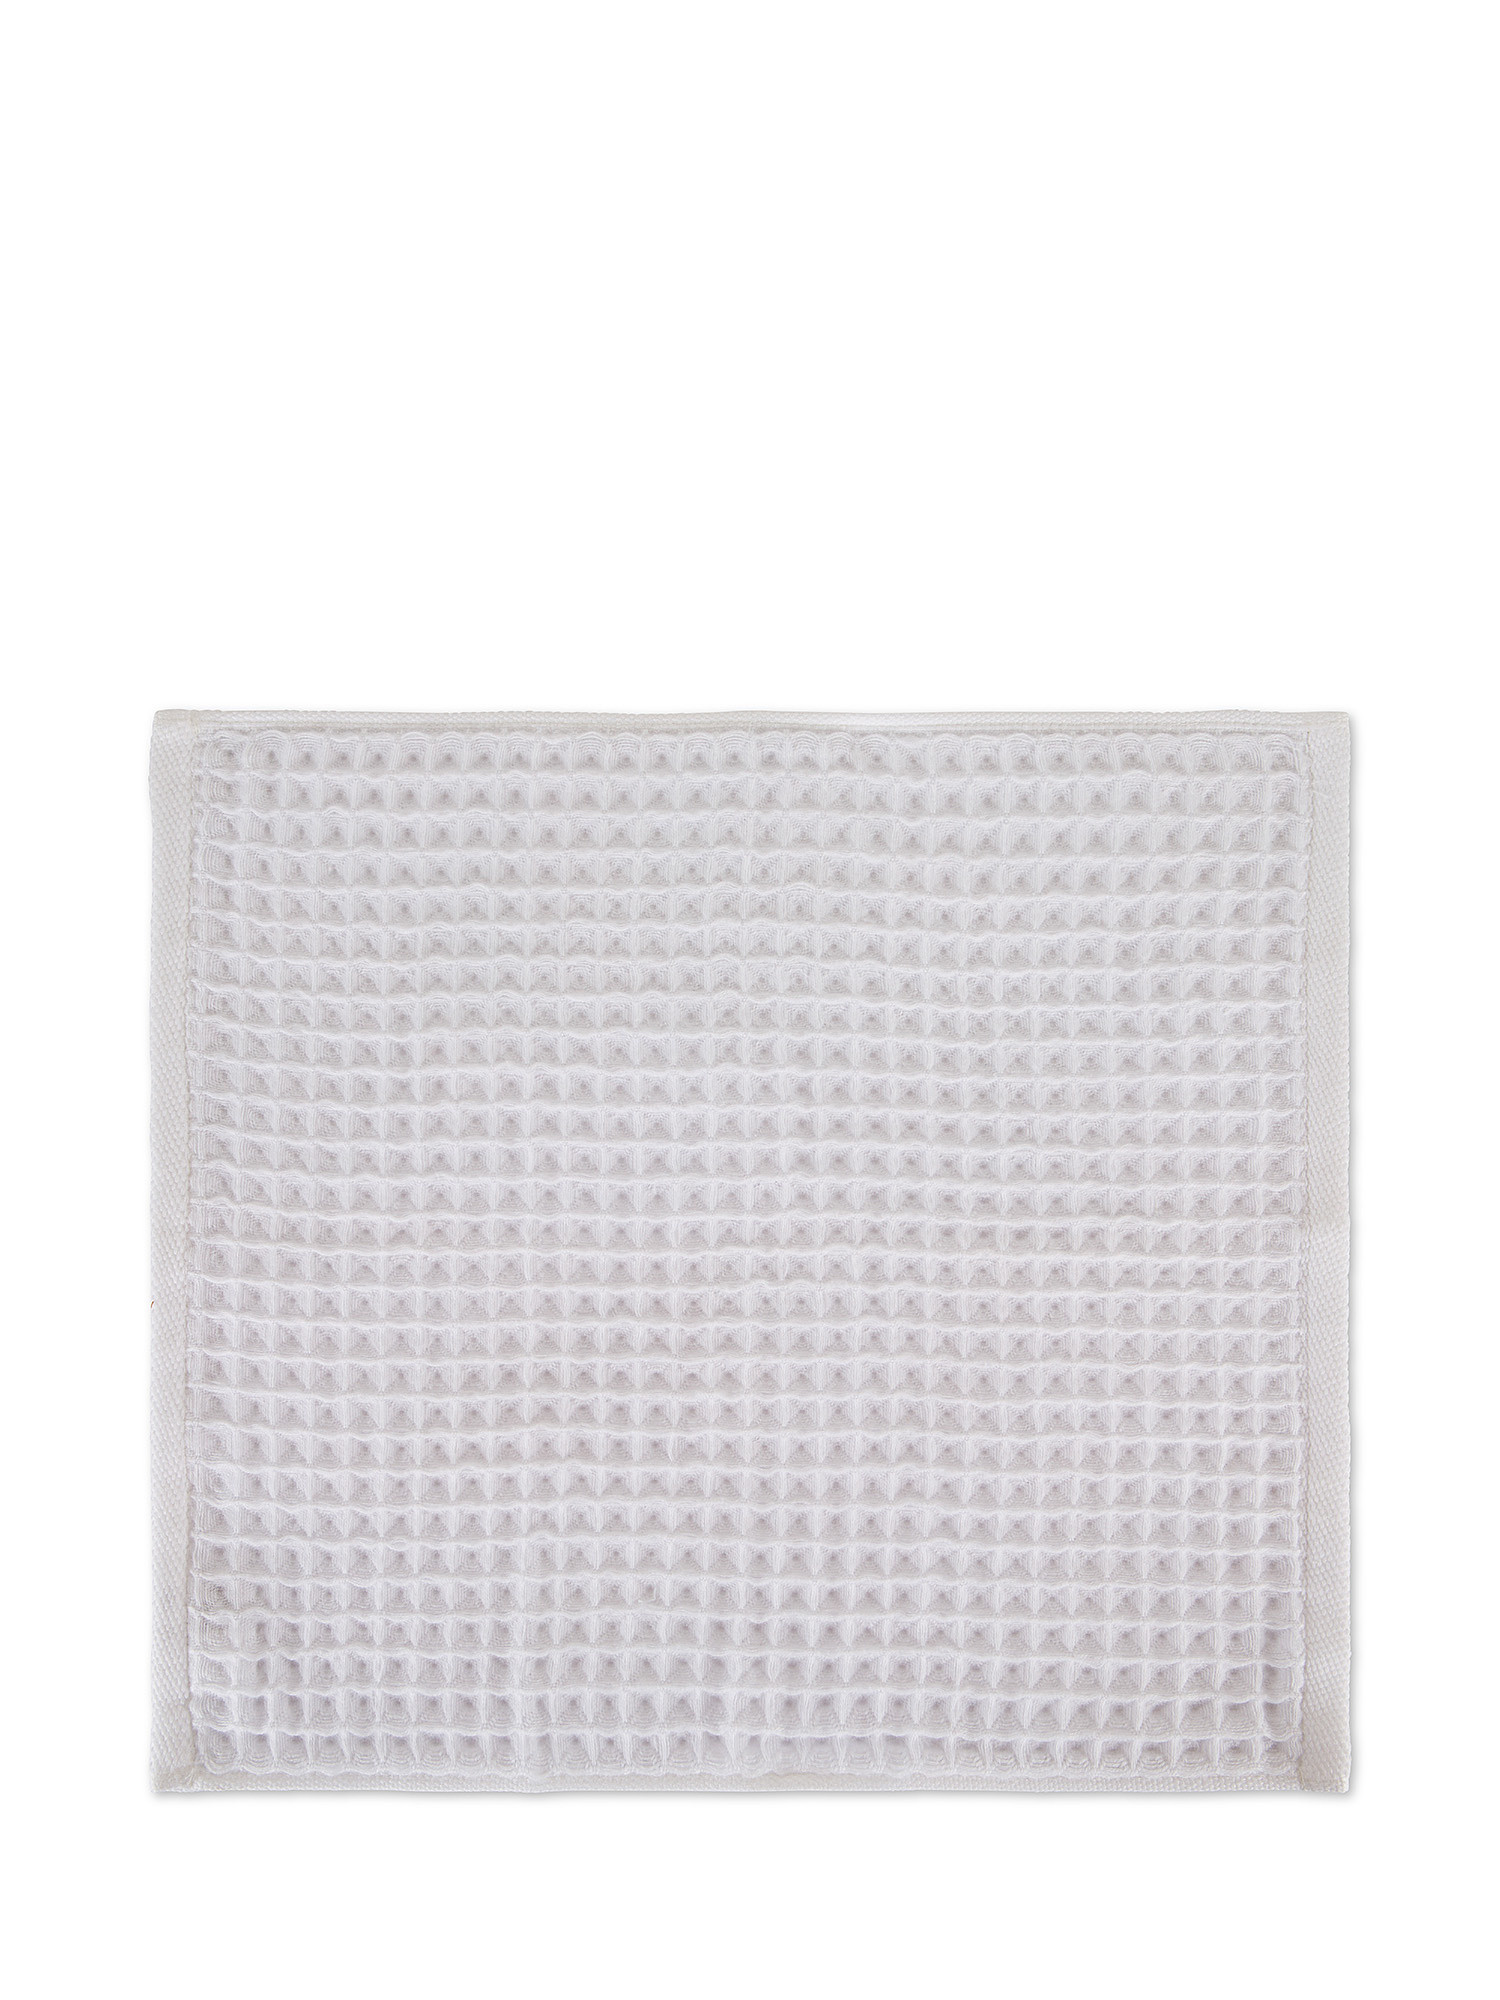 Thermae waffle weave towel, White, large image number 1